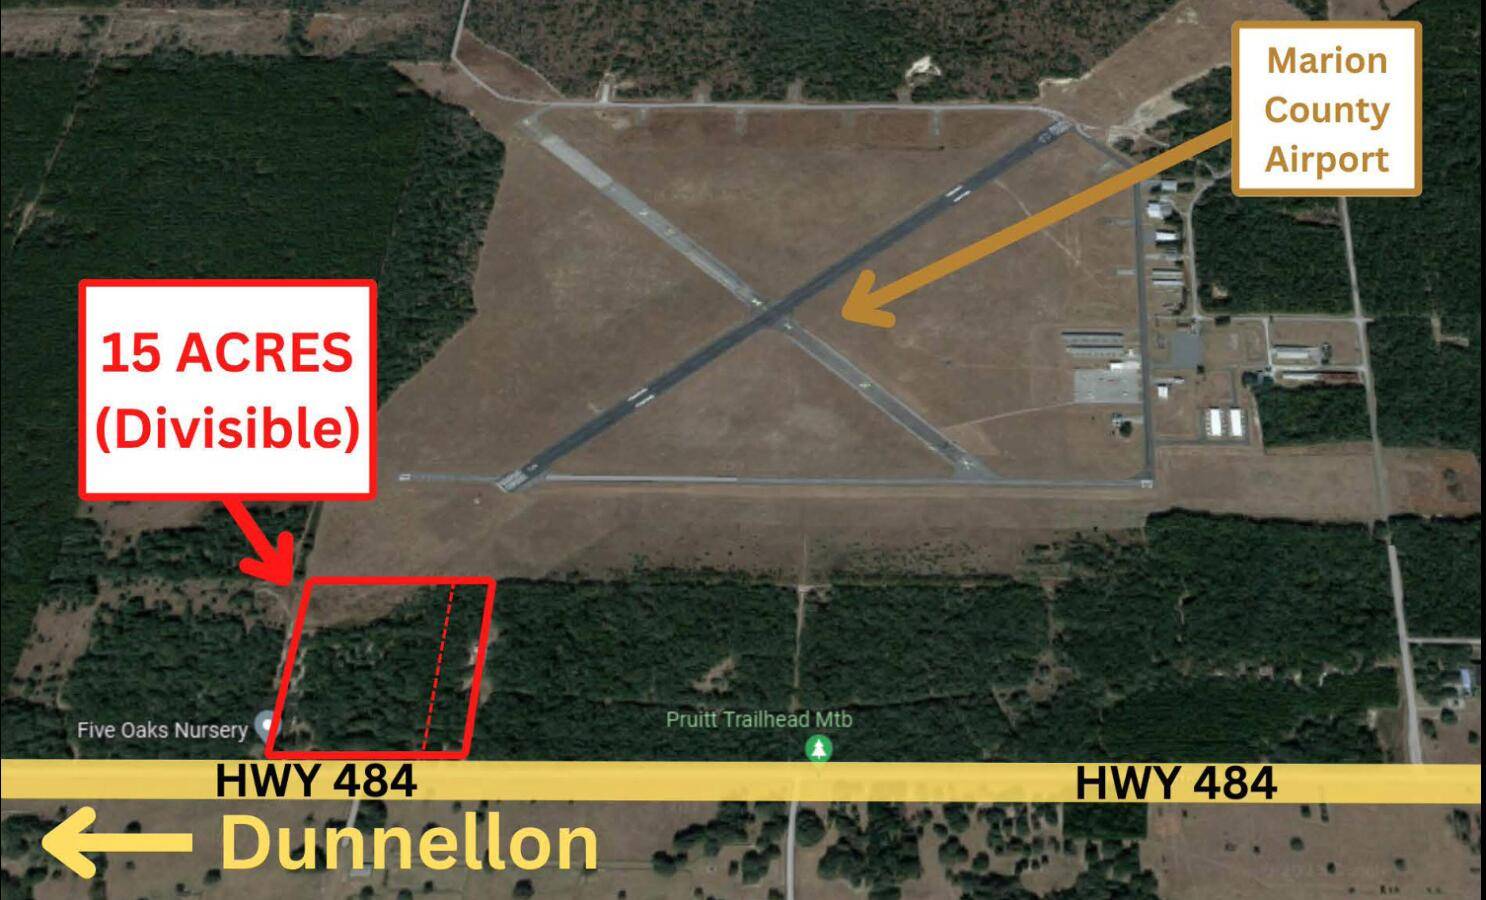 15 Acres for Sale in OCALA Dunnellon, FL divisible to 4.